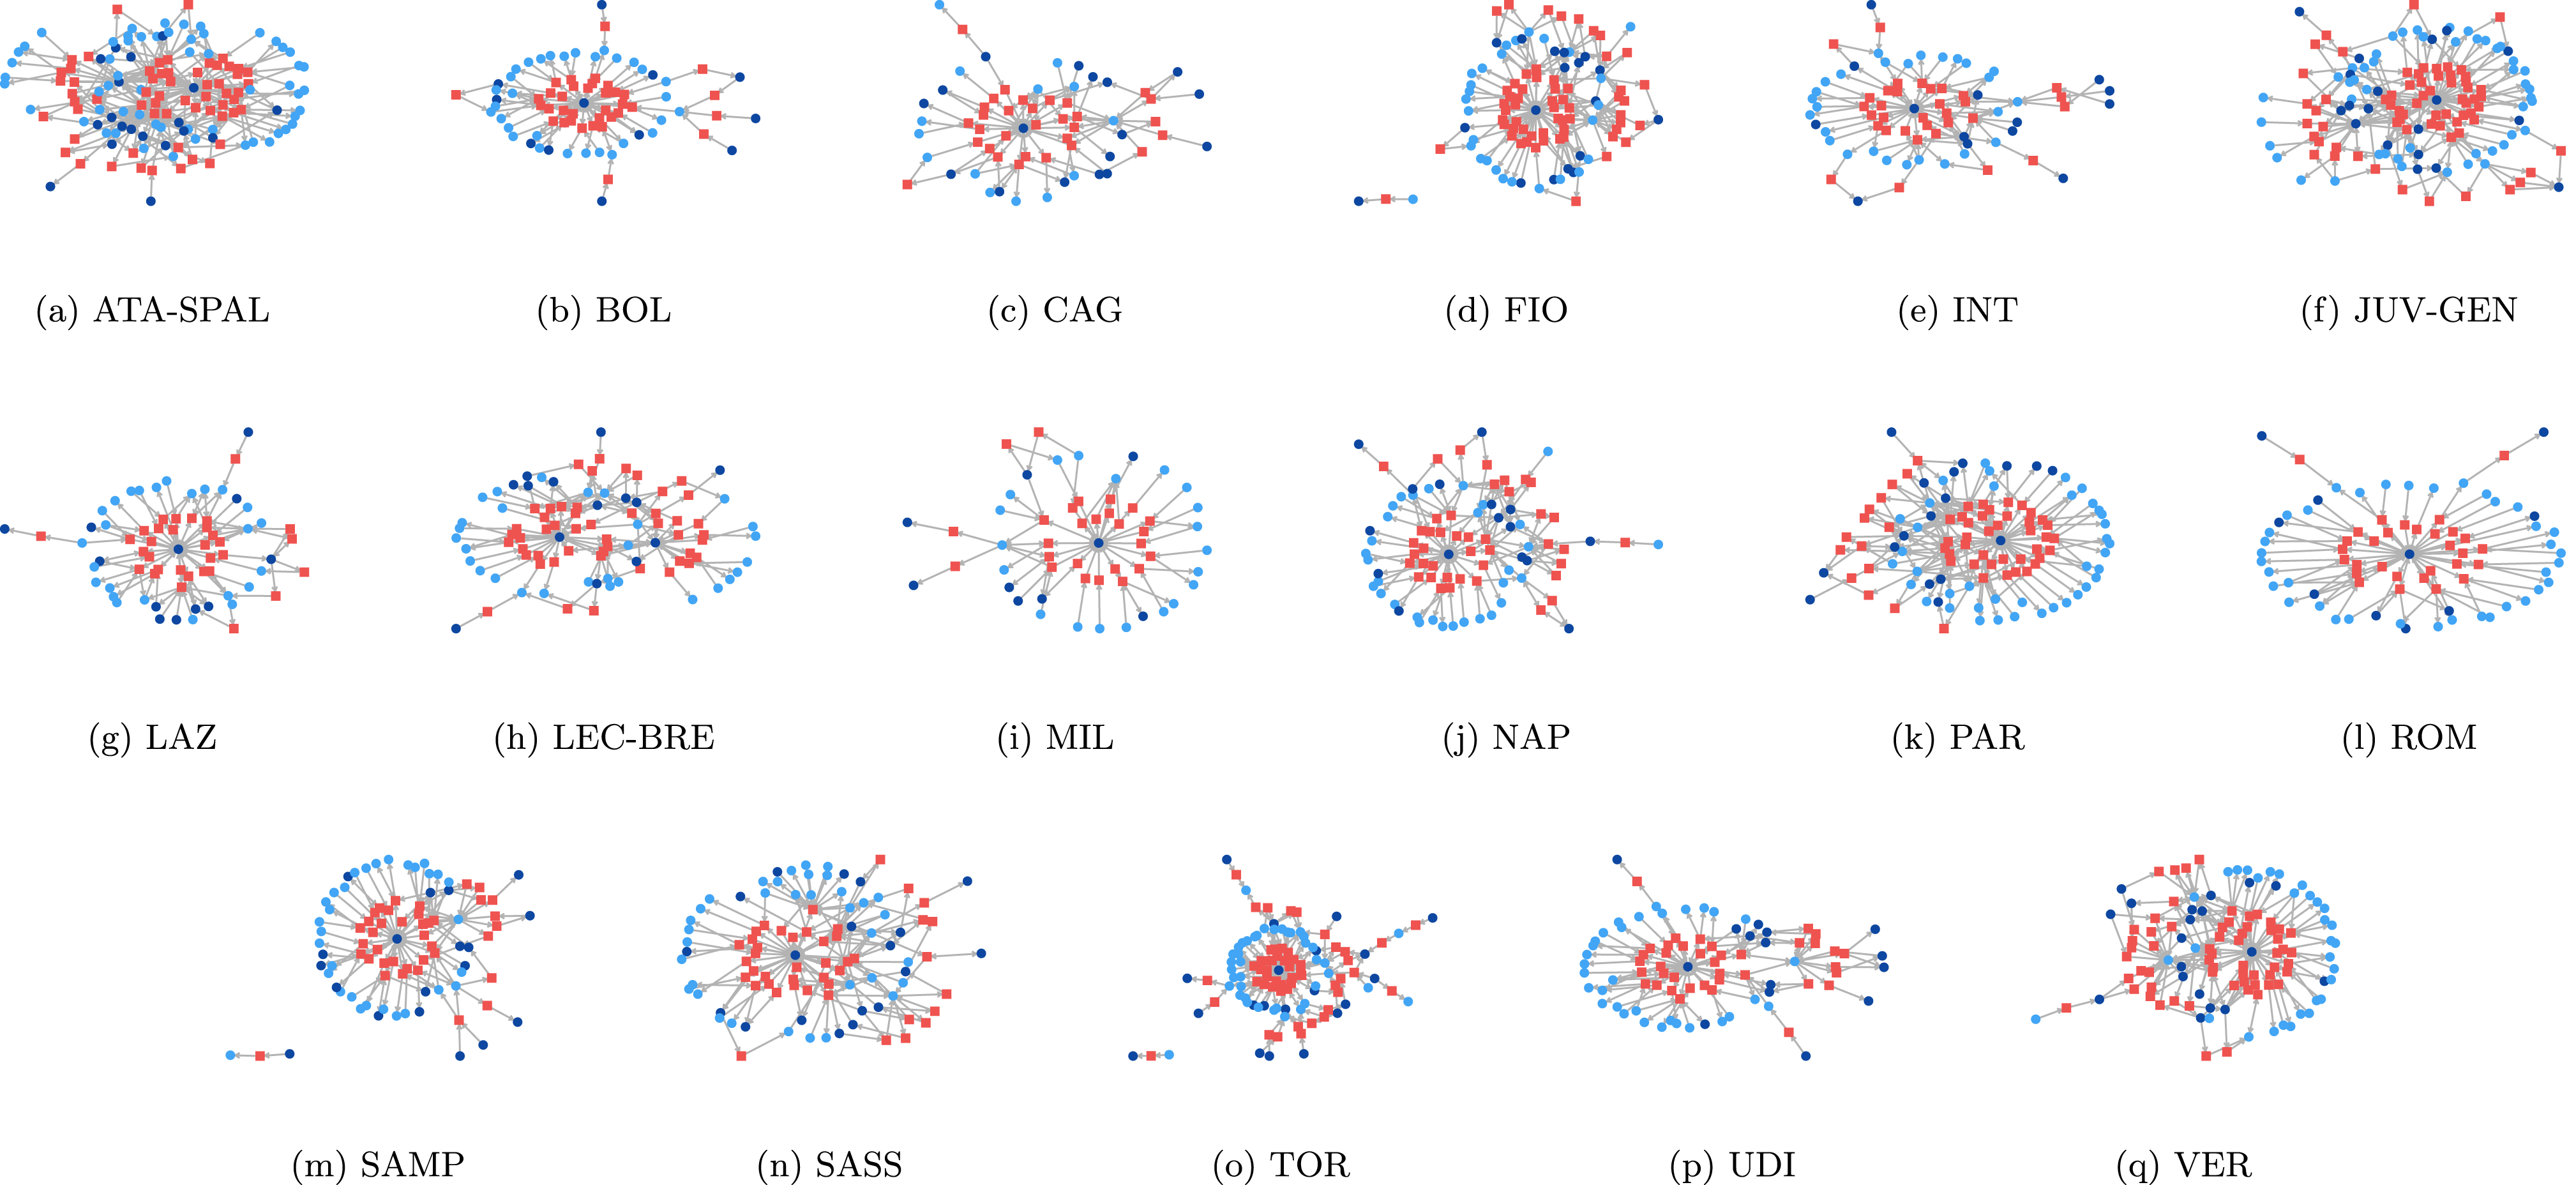 Communities of transactions. Player agents are depicted in red squares, dark blue dots highlight Serie A teams and light blue dots represent the other teams.